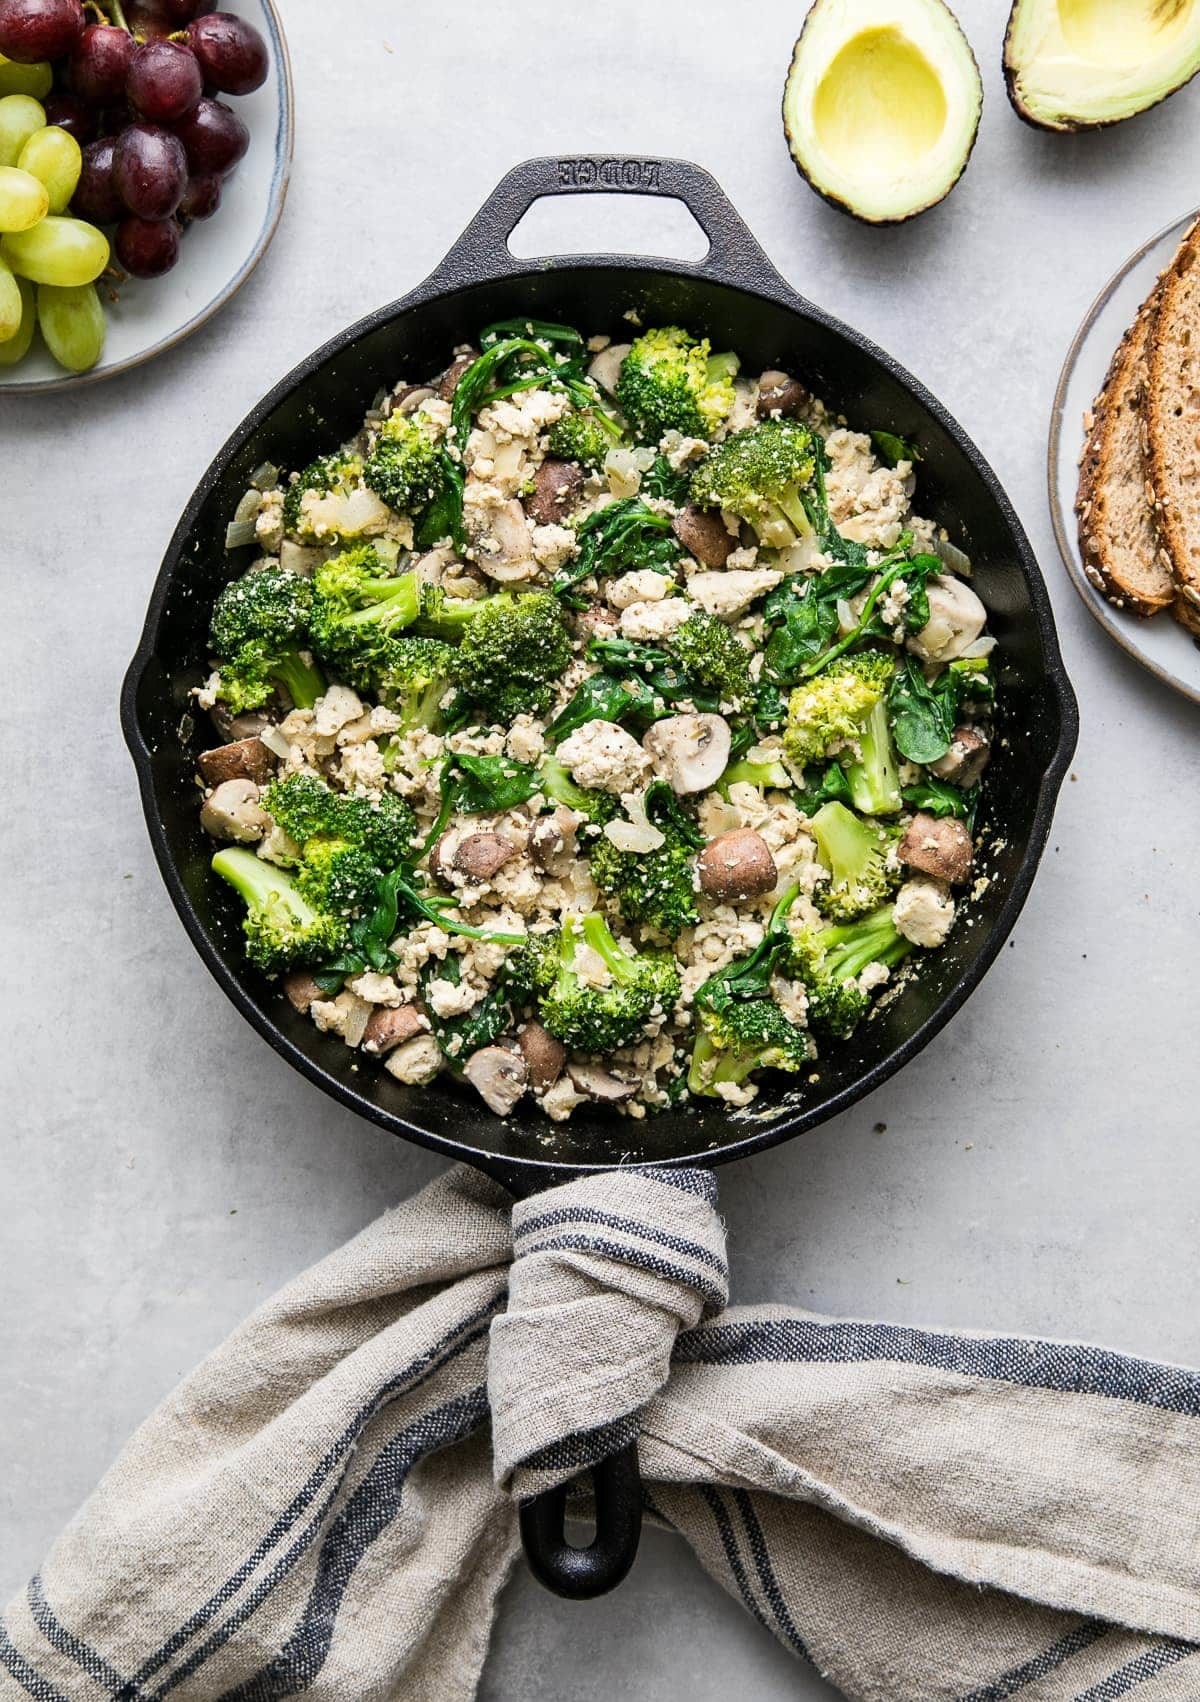 skillet with tofu, mushrooms, broccoli and spinach